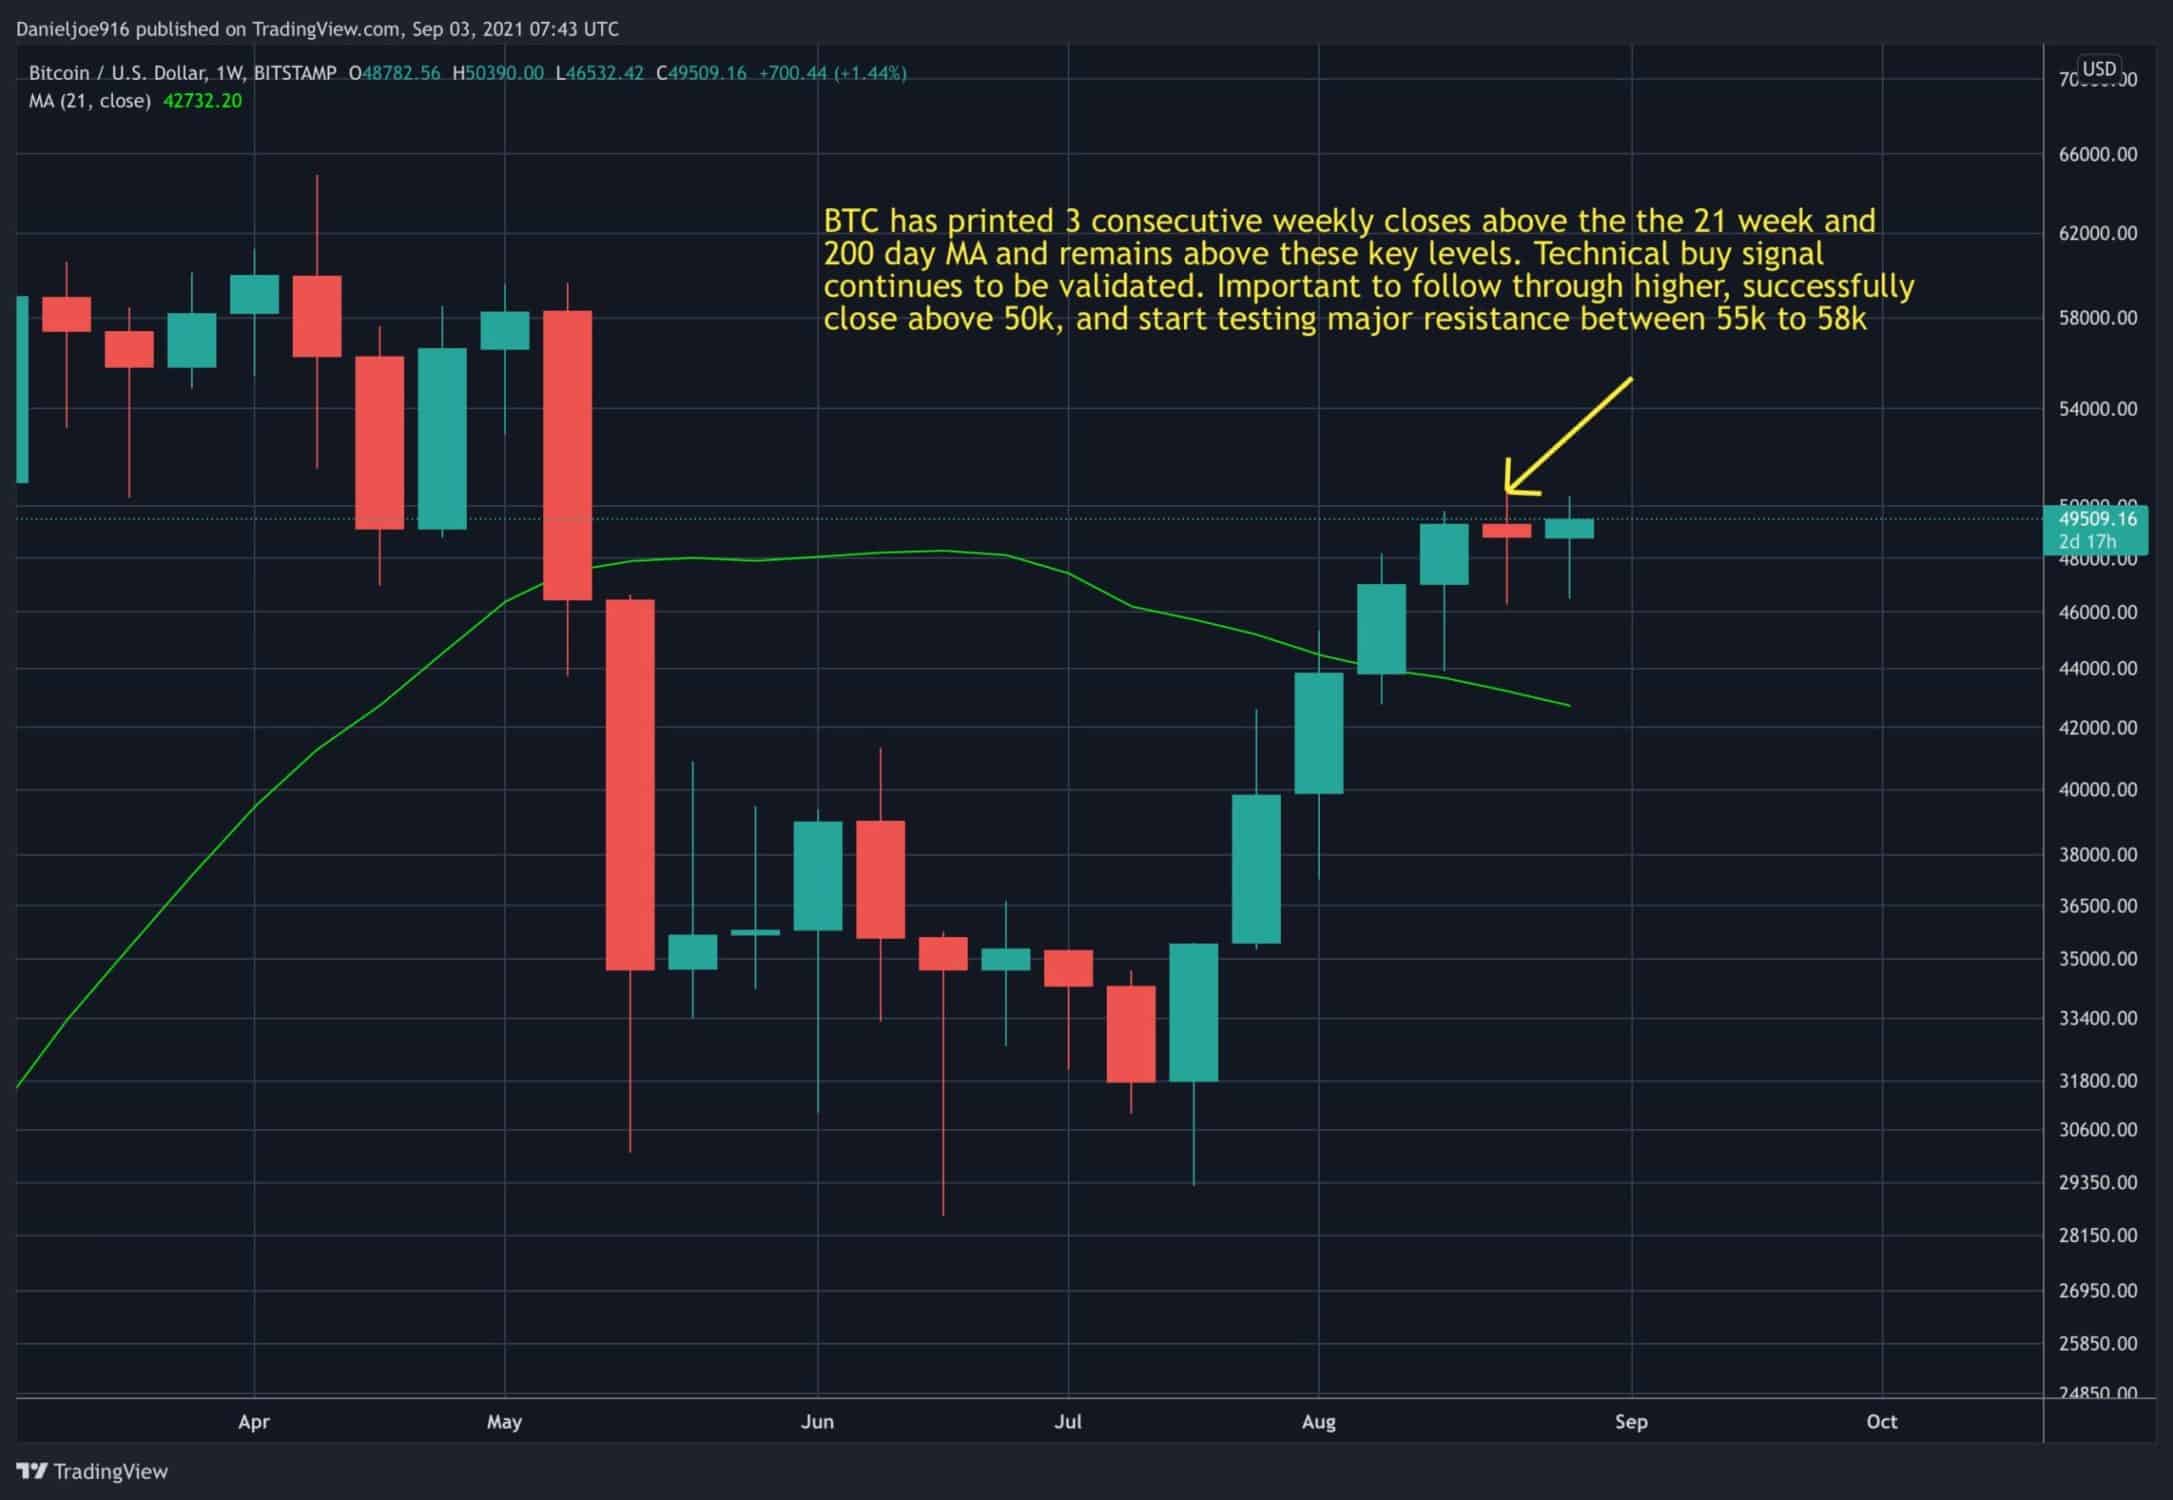 Chart from Tradingview